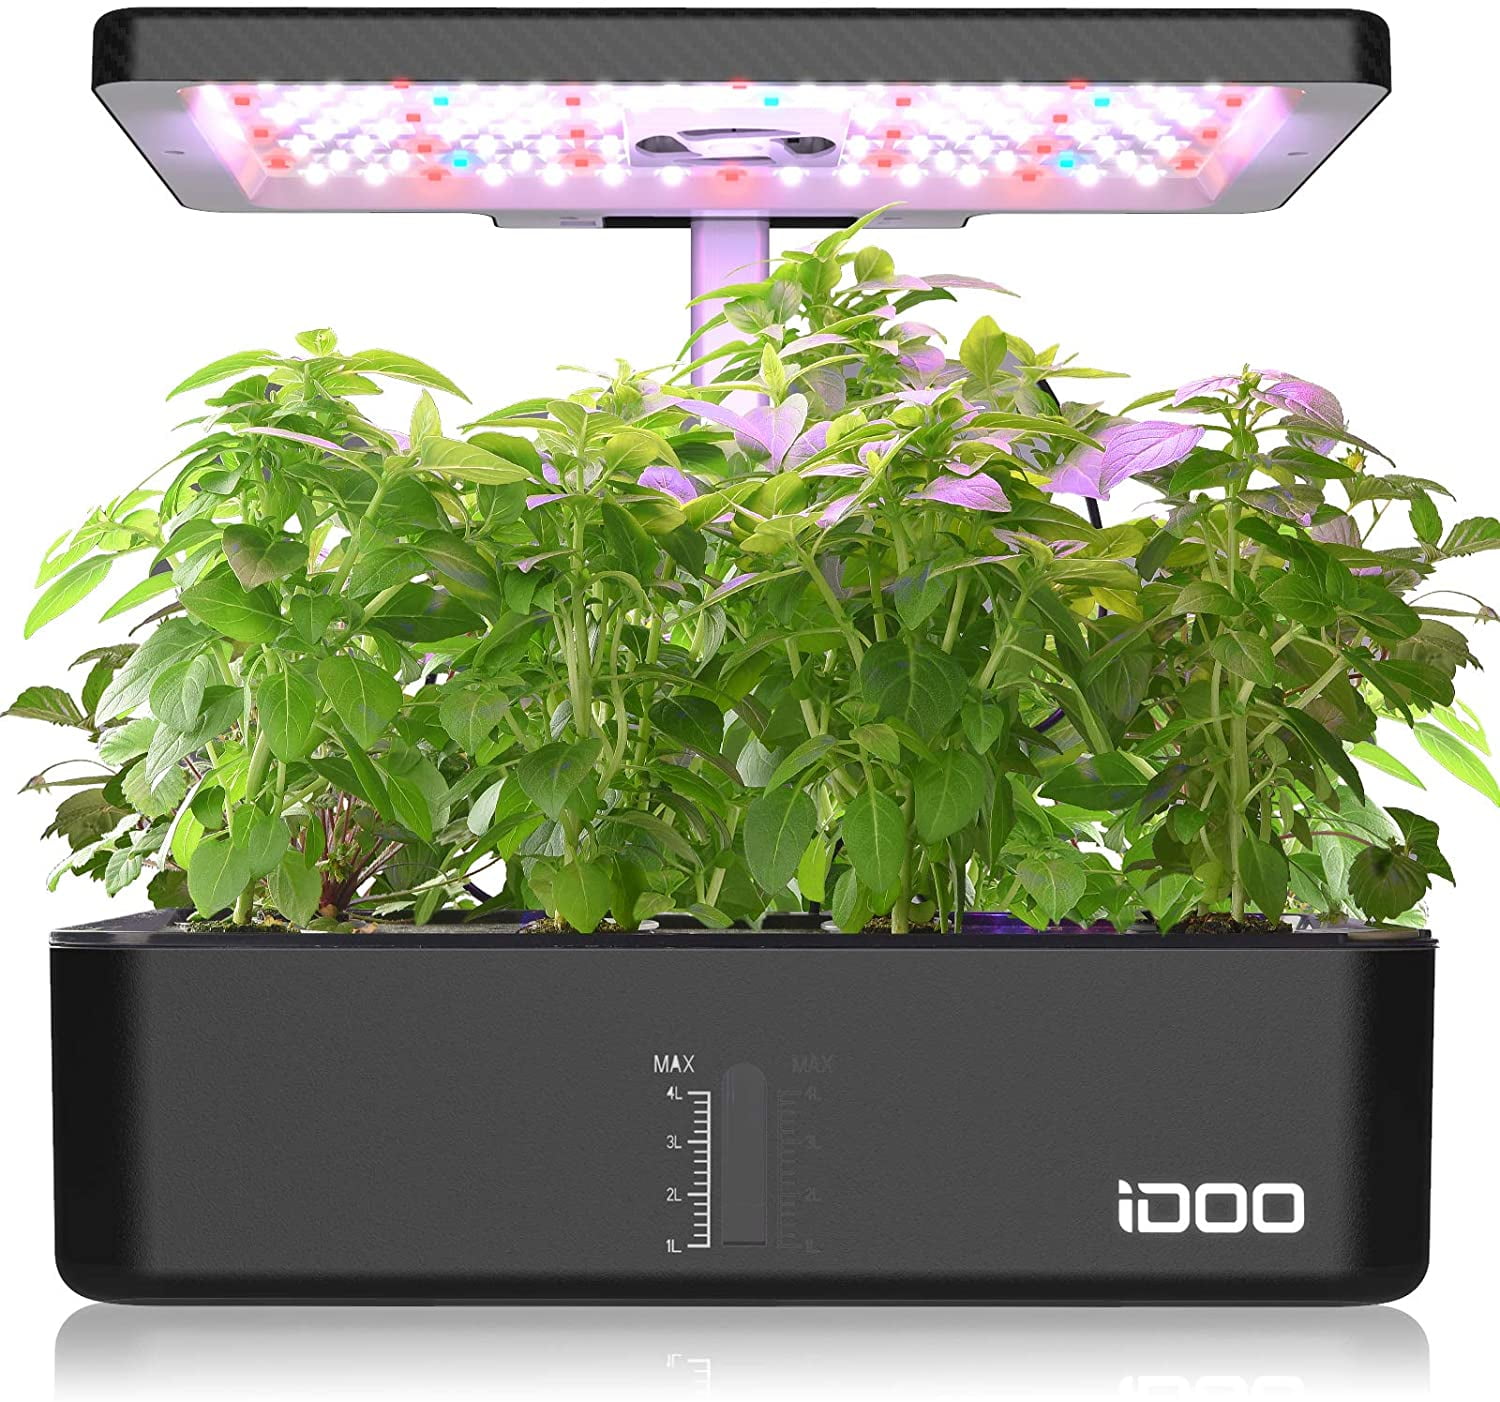 Indoor Herb Garden Starter Kit with LED Grow Light Smart Garden Planter for Home Kitchen Automatic Timer Germination Kit 7 Pods, Seeds not included Hydroponics Growing System Height Adjustable 